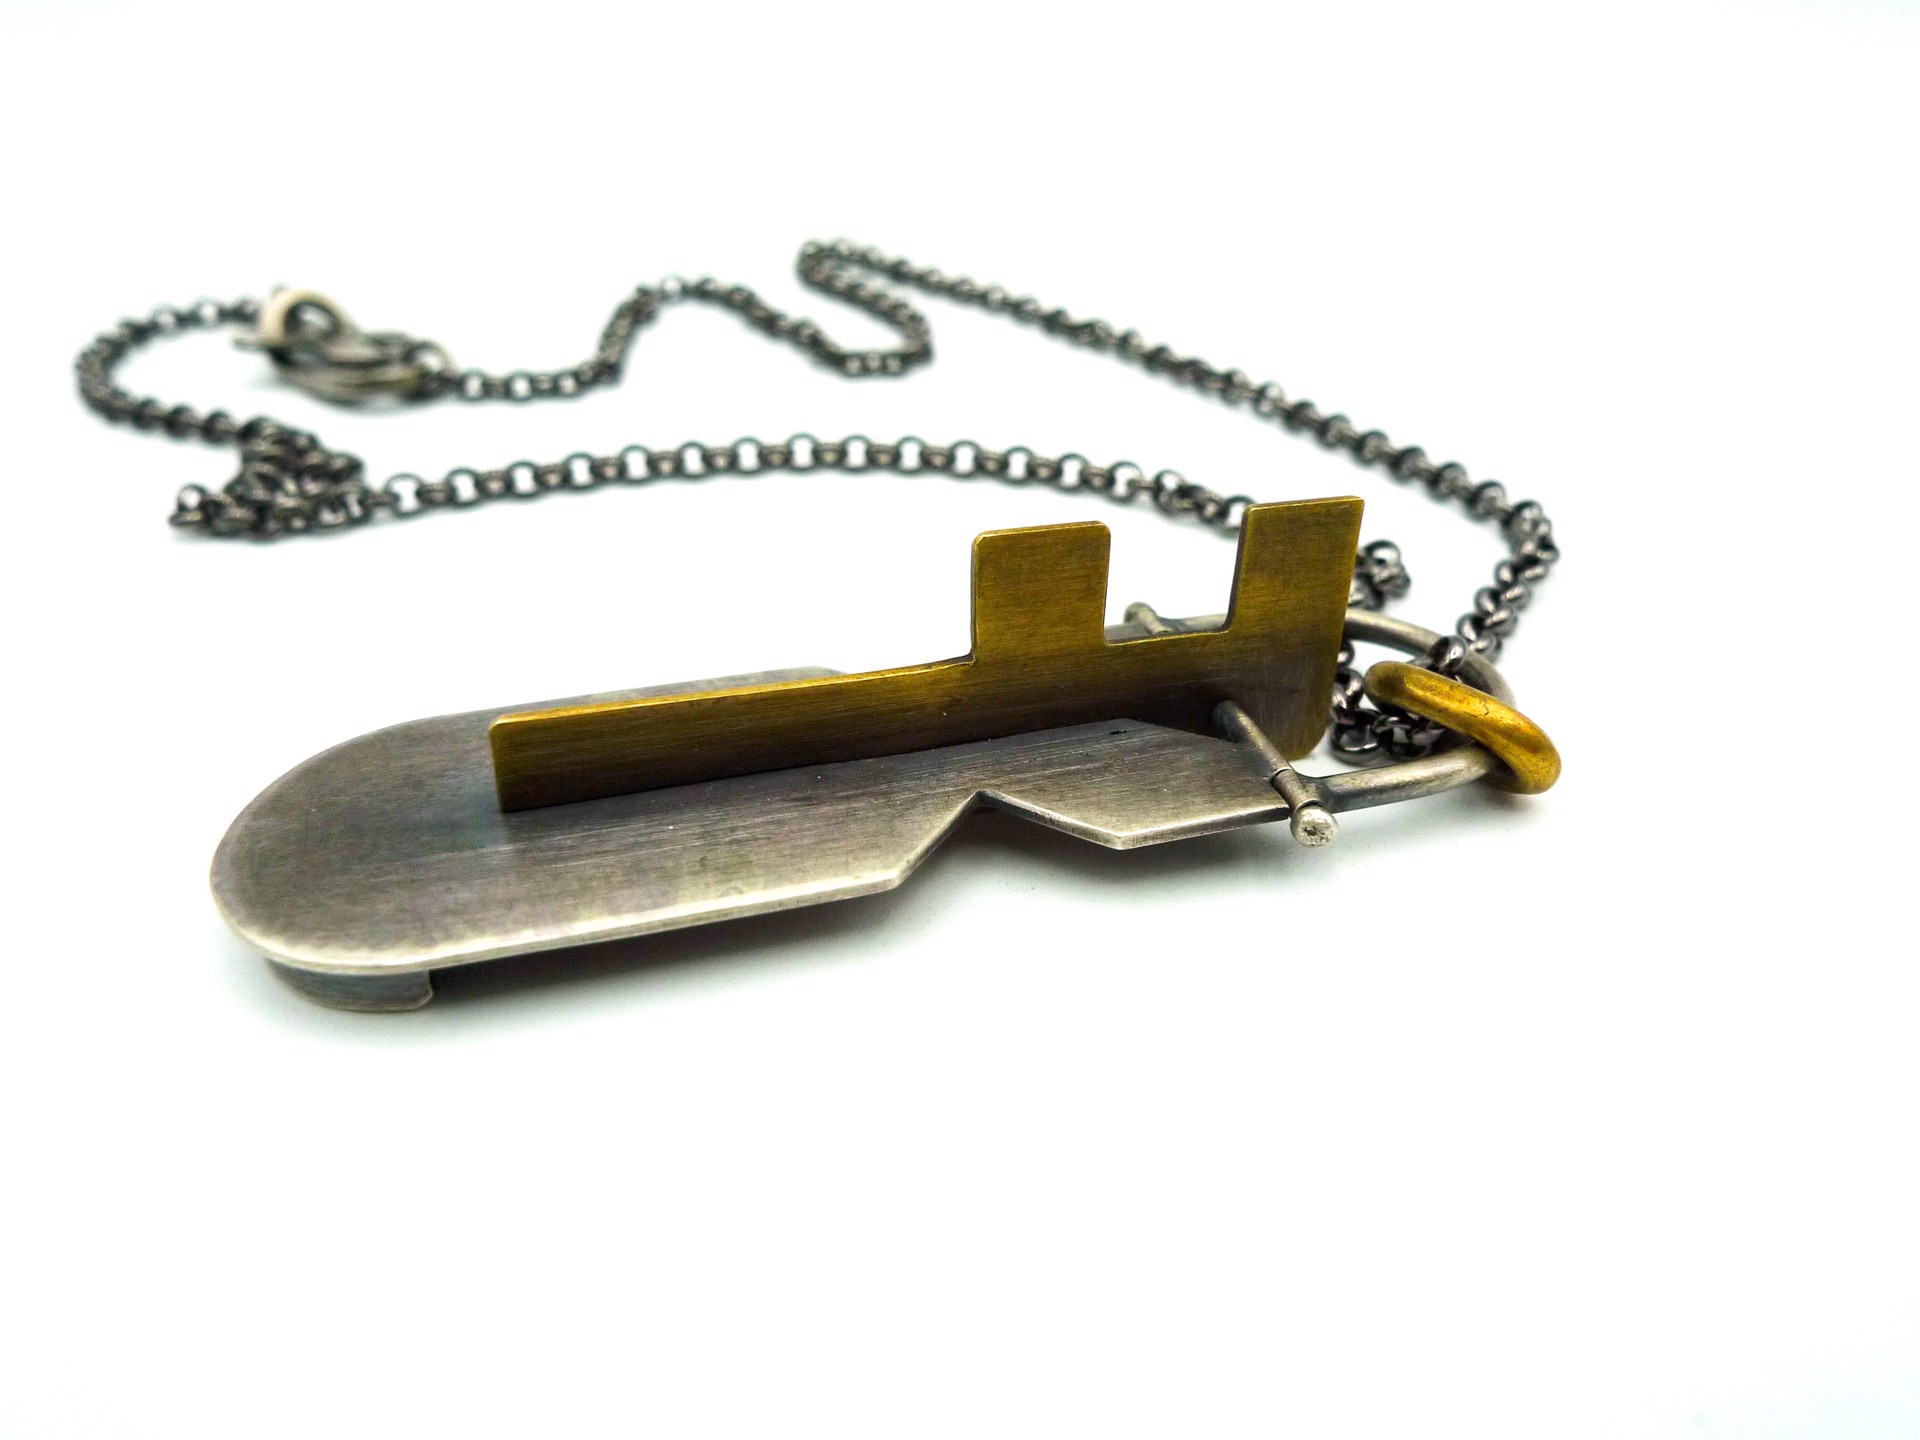 F-Bomb Necklace by Danny Saathoff